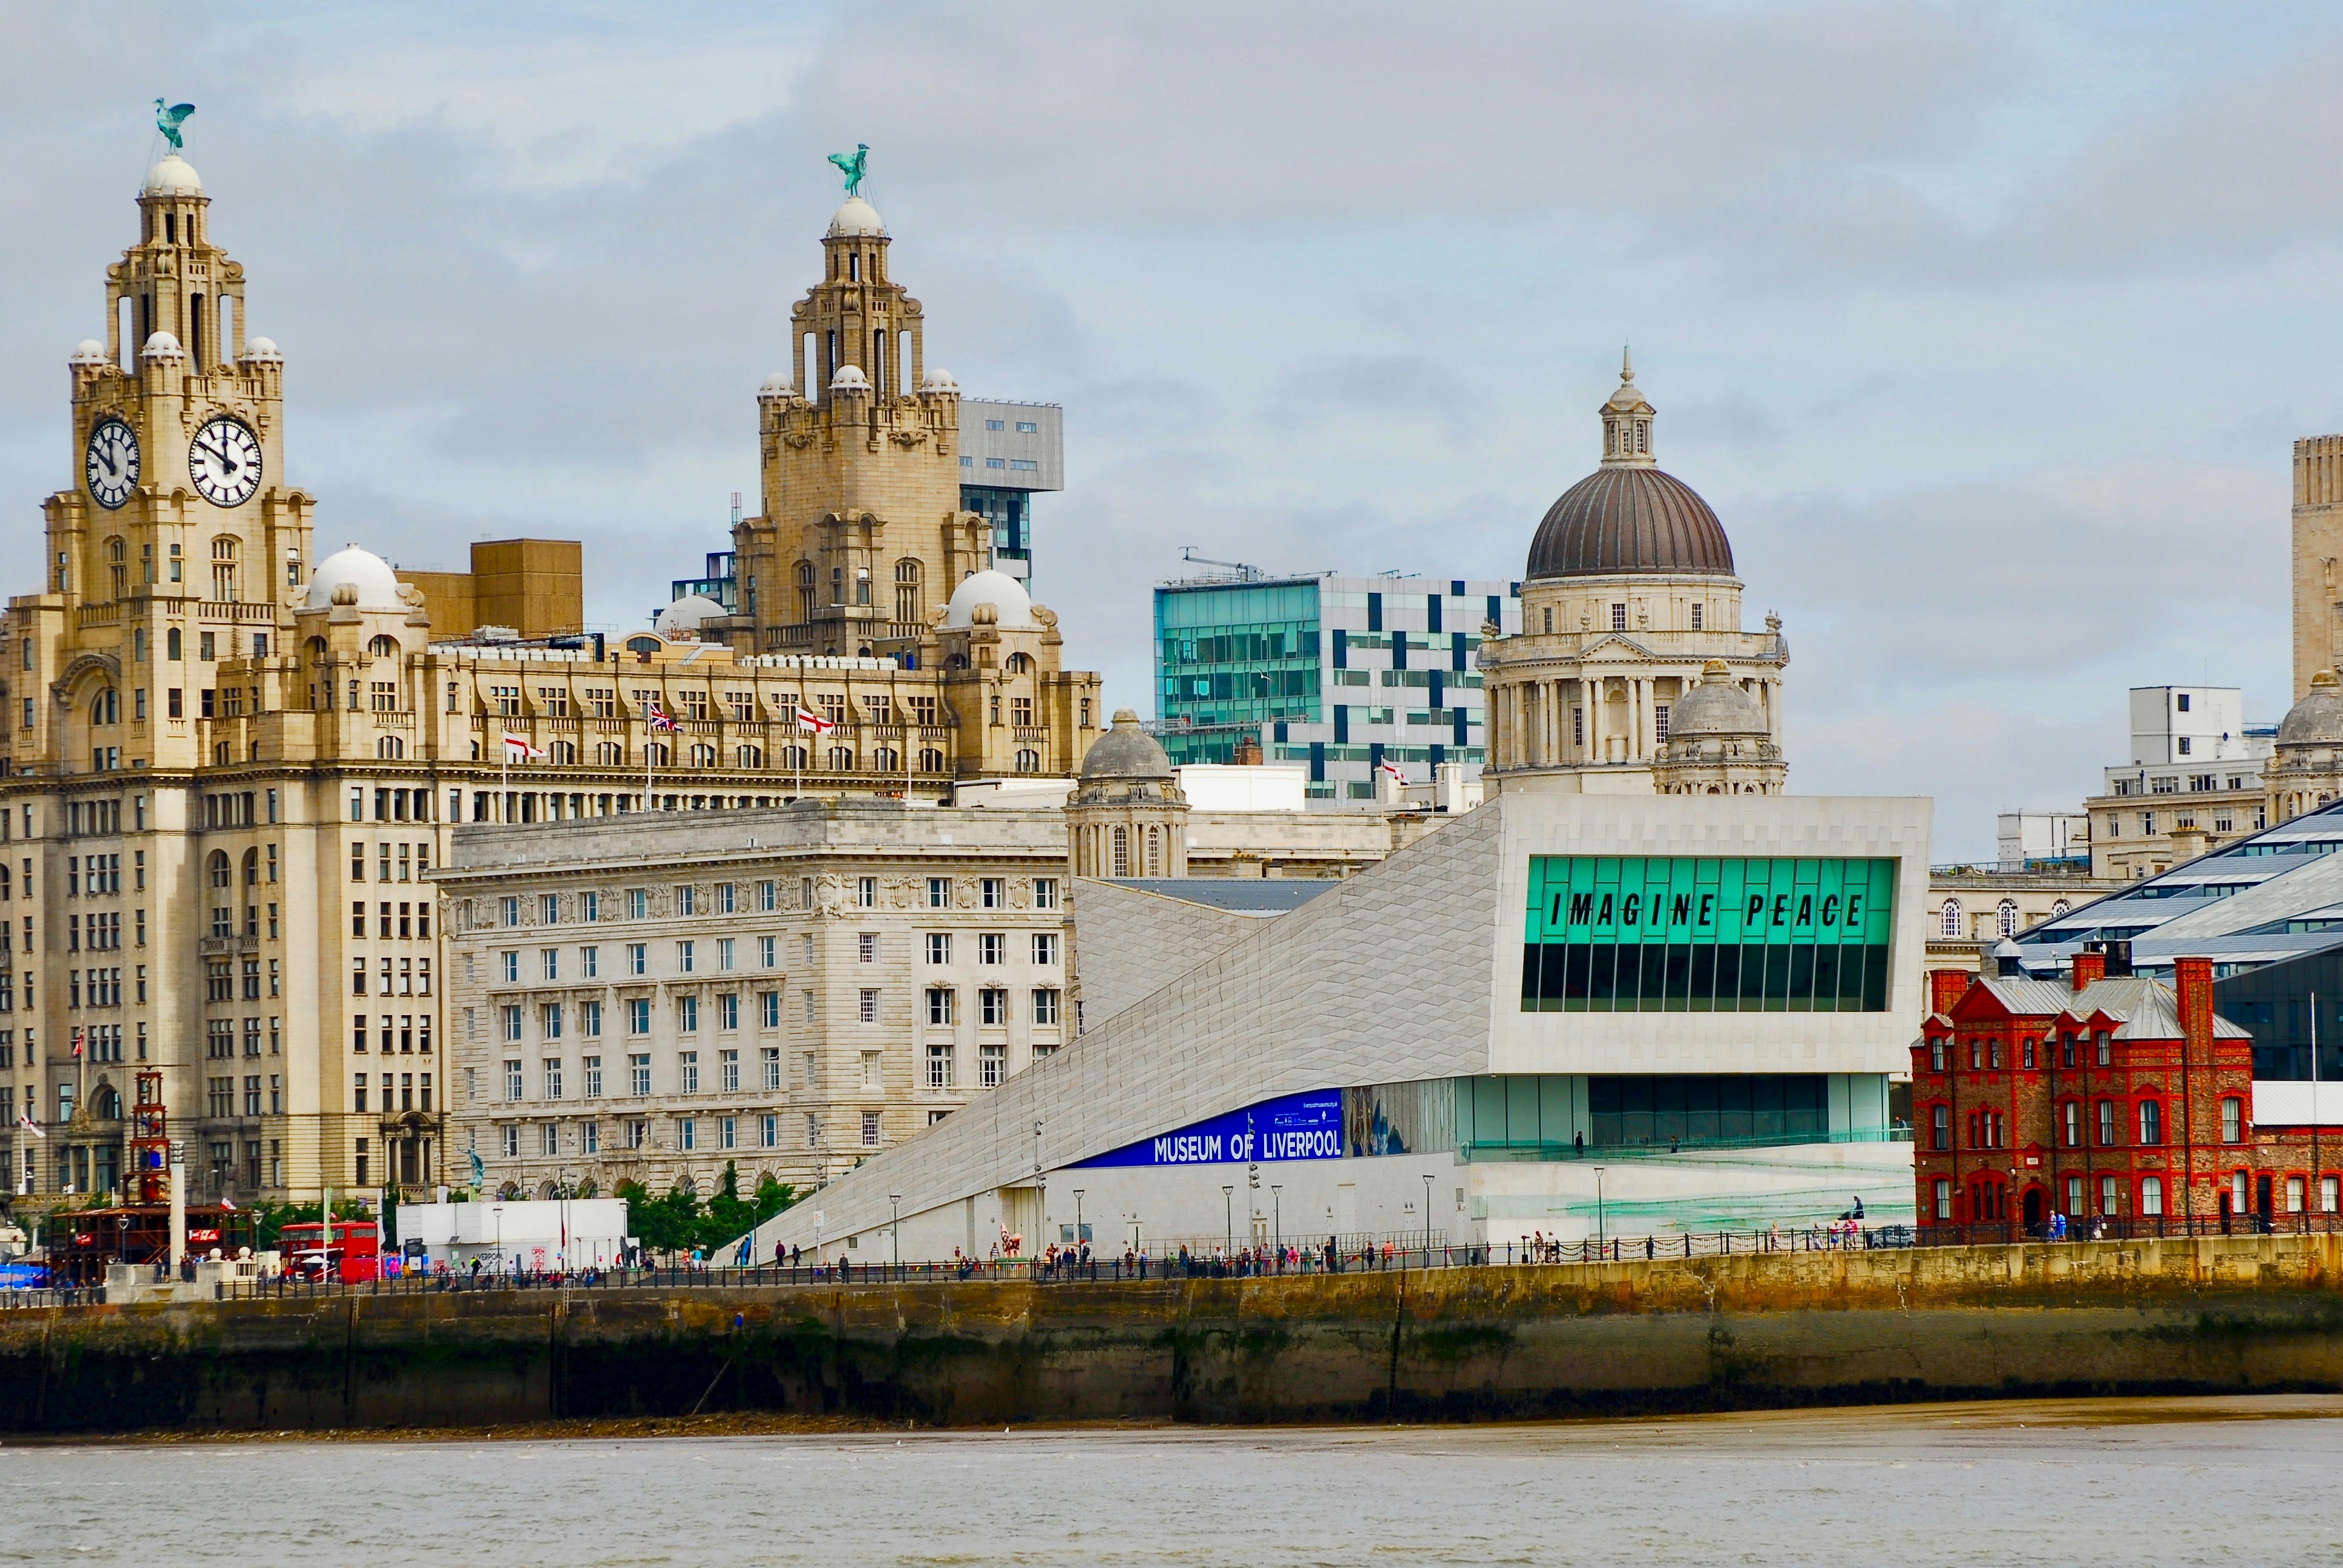 The female Liver Bird is said to look over the river Mersey looking out for sailors that are entering the port. The male Liver Bird is looking over the city said to be looking for the pub.